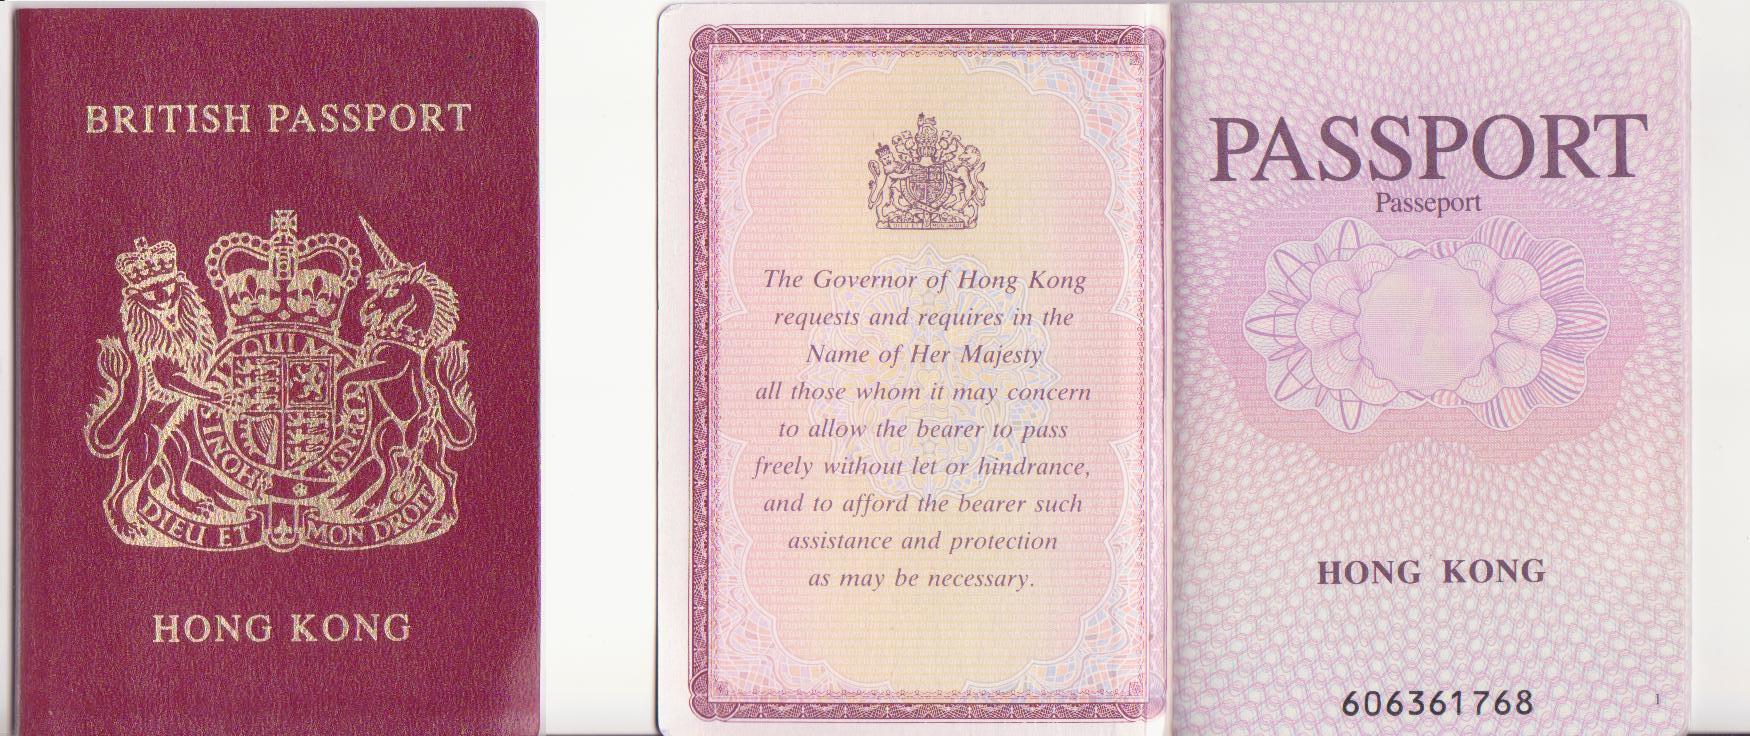 British passport issued to Hong Kong people prior to the colony's return to China in 1997.